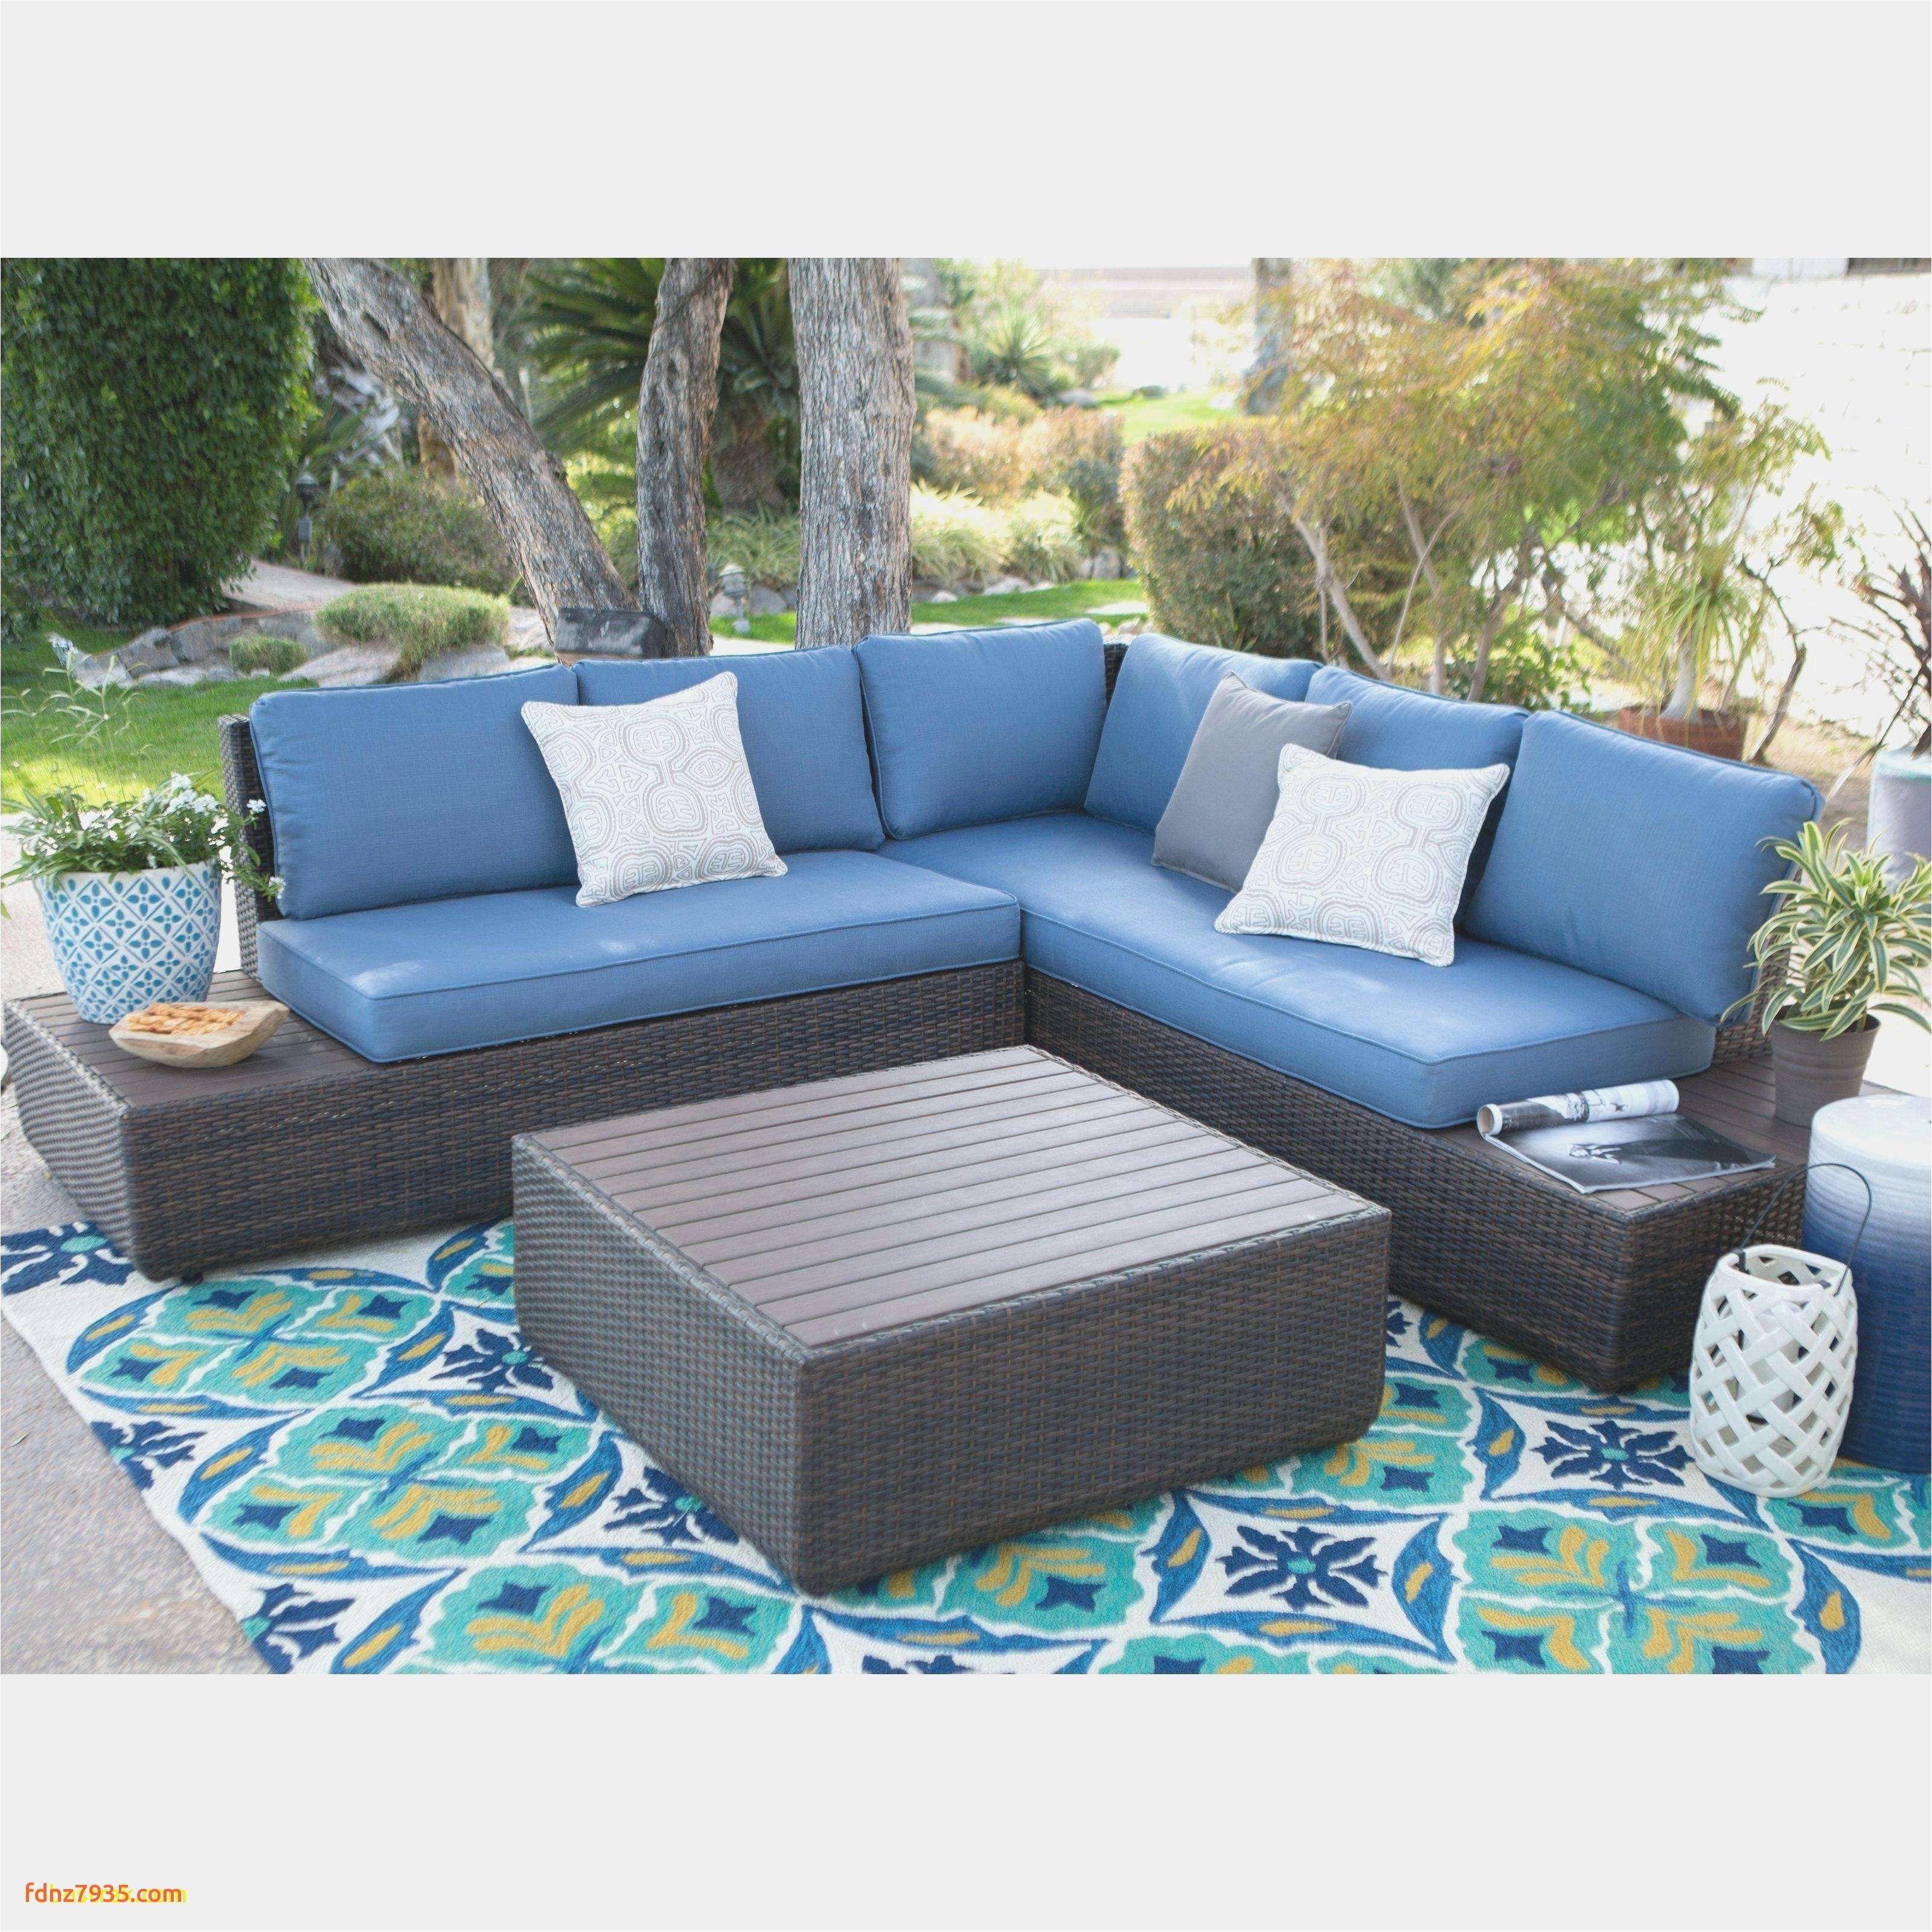 lazy boy furniture sale luxury wicker outdoor sofa 0d patio chairs sale replacement cushions